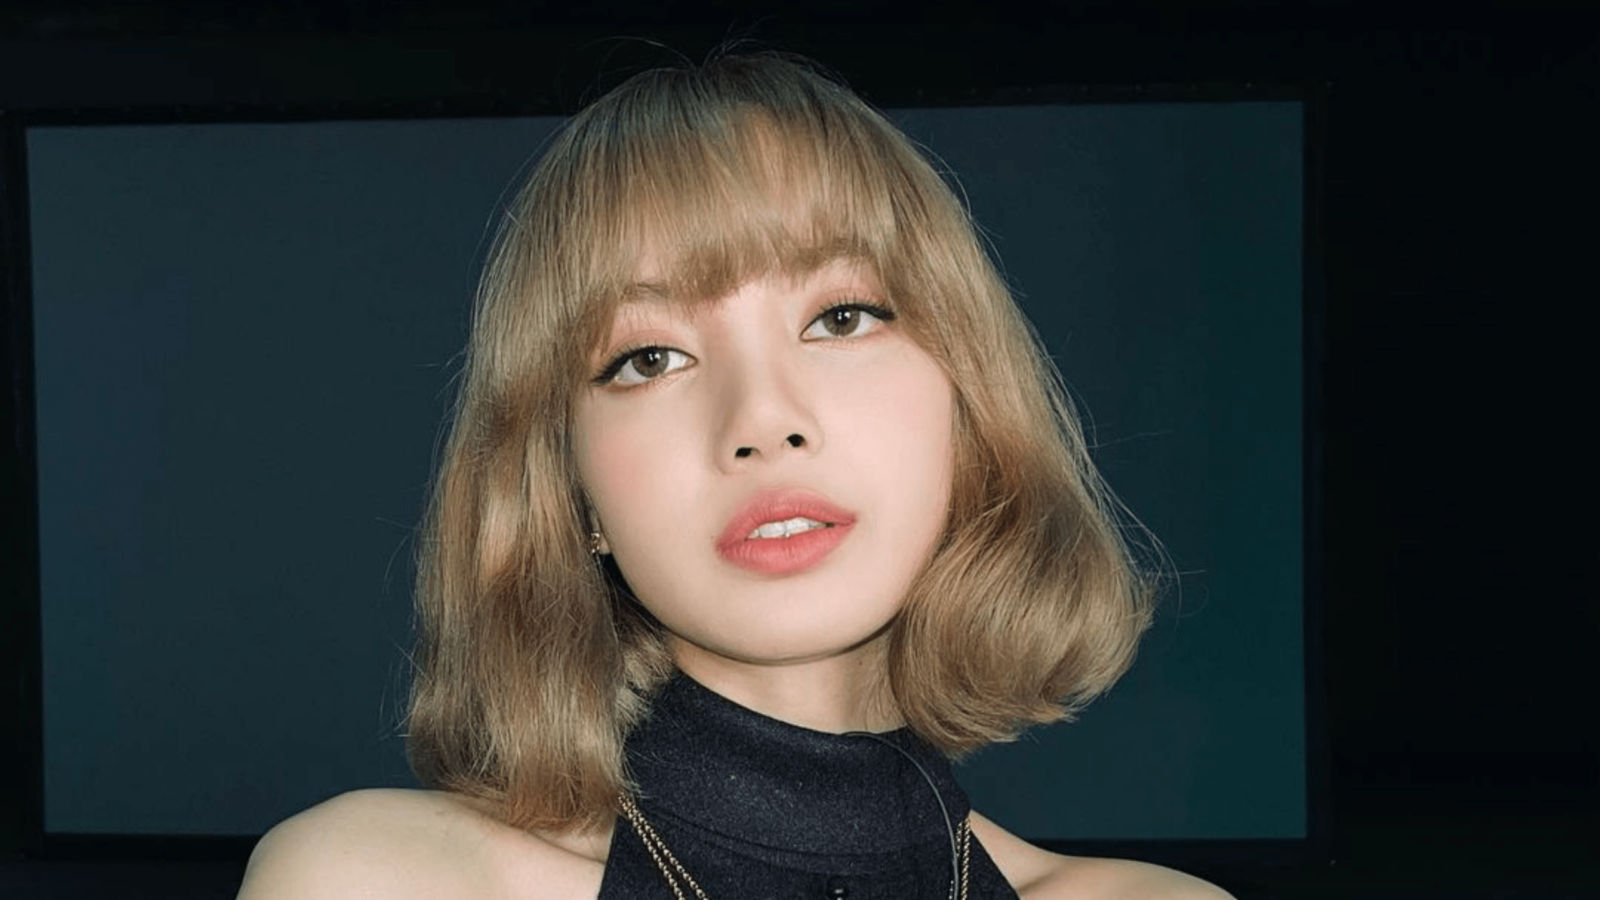 Blackpink's Lisa is going solo – here's all we know about her debut album